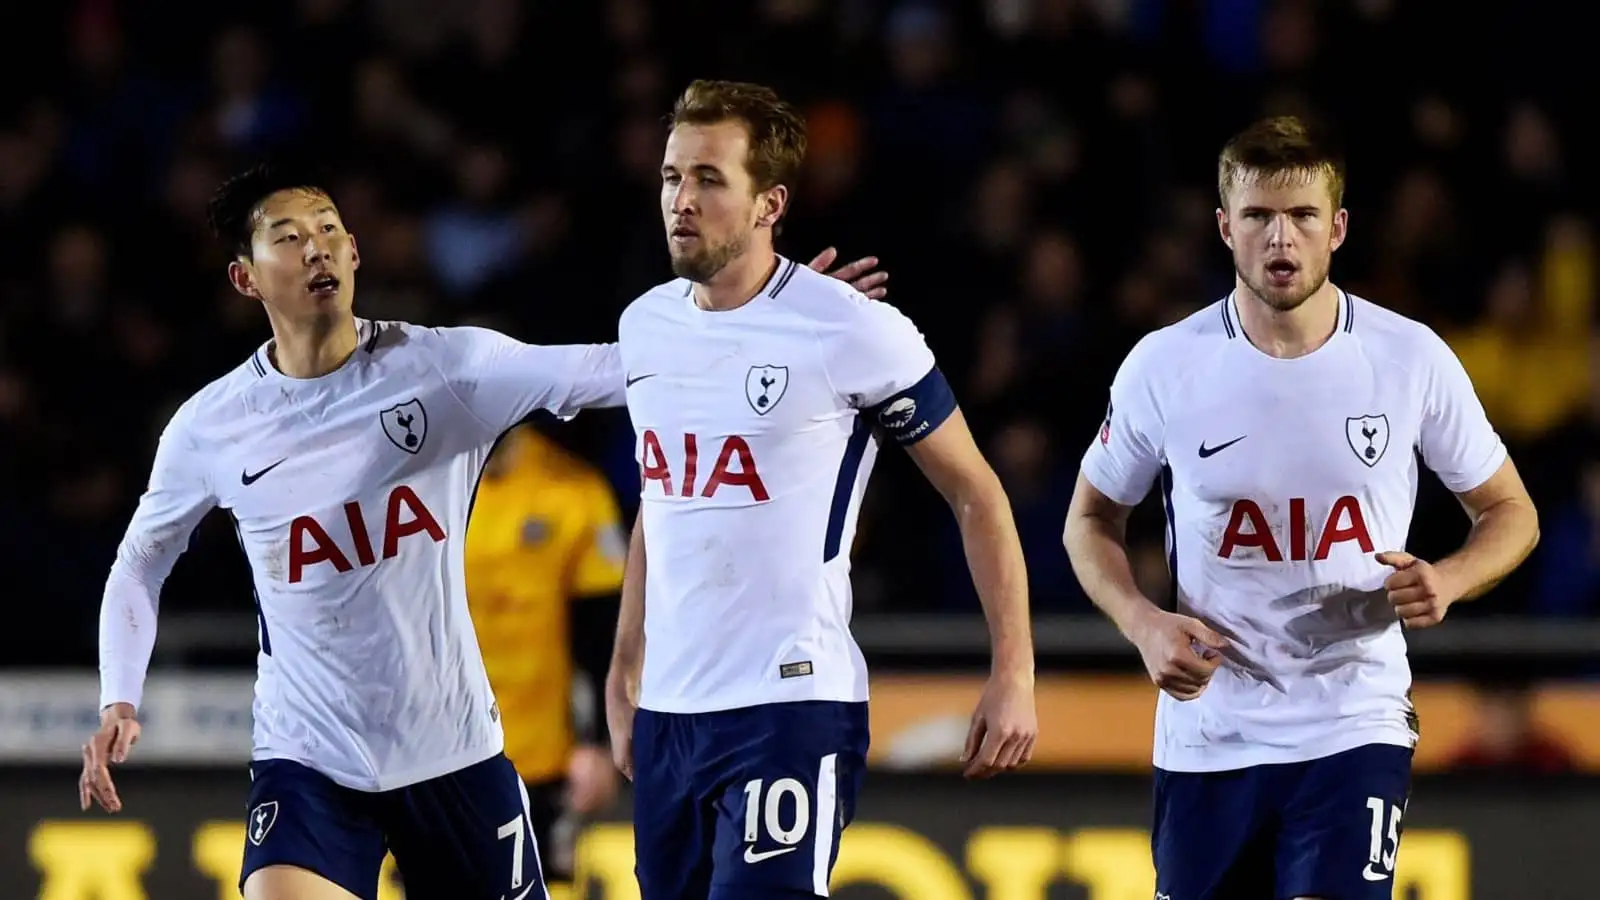 Son Heung-min, Harry Kane and Eric Dier of Tottenham